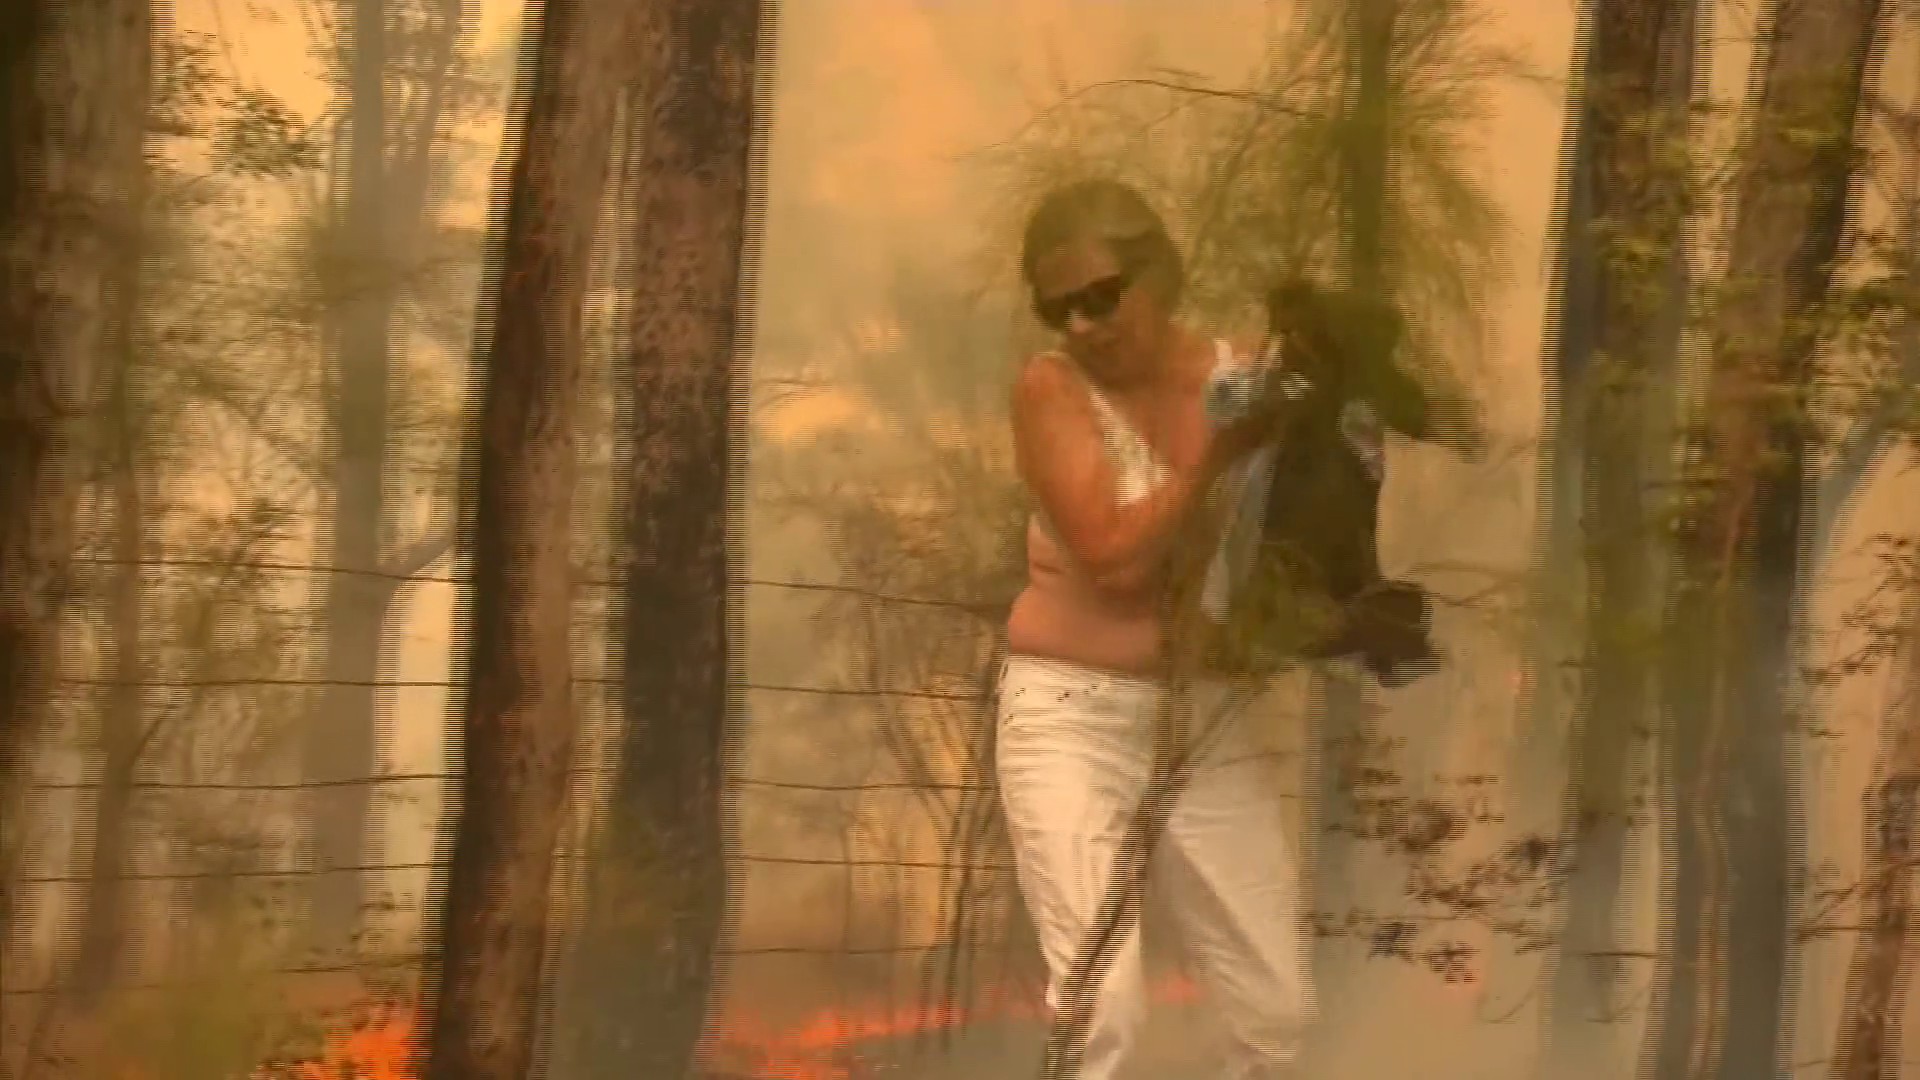 Woman gives shirt off her back to save koala caught in bush fire